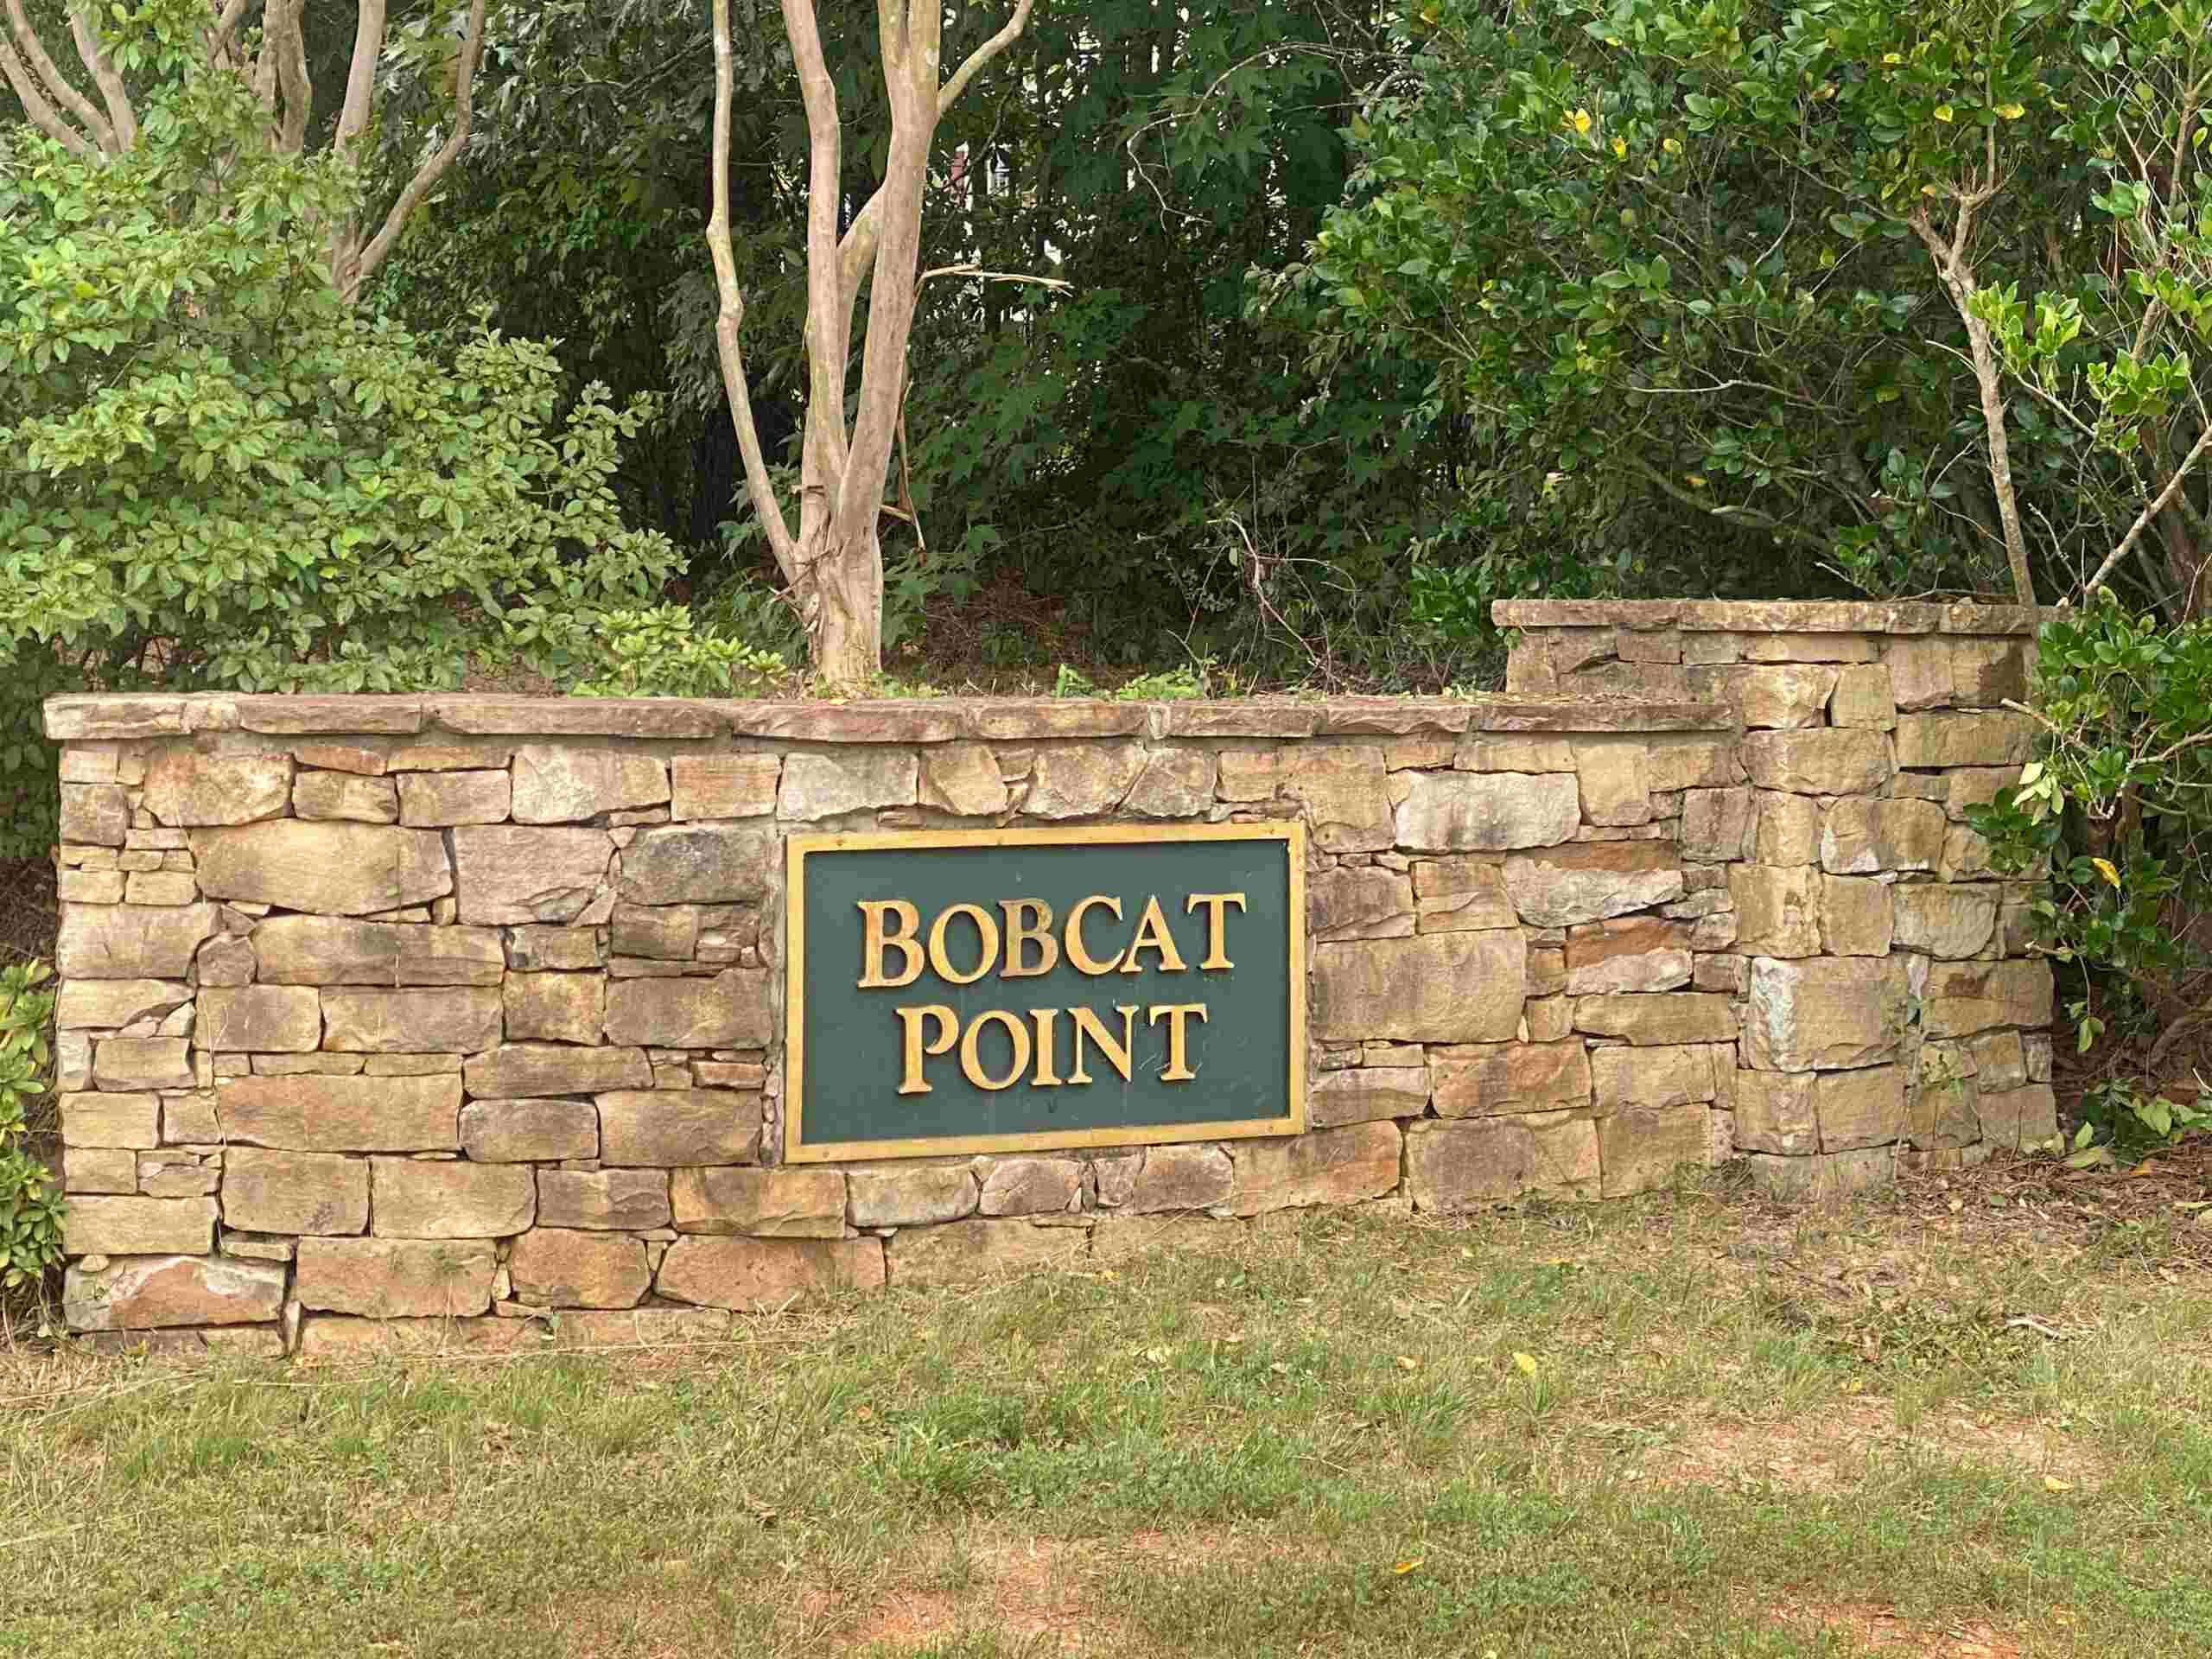 Bobcat Point Name Plate on the Wall